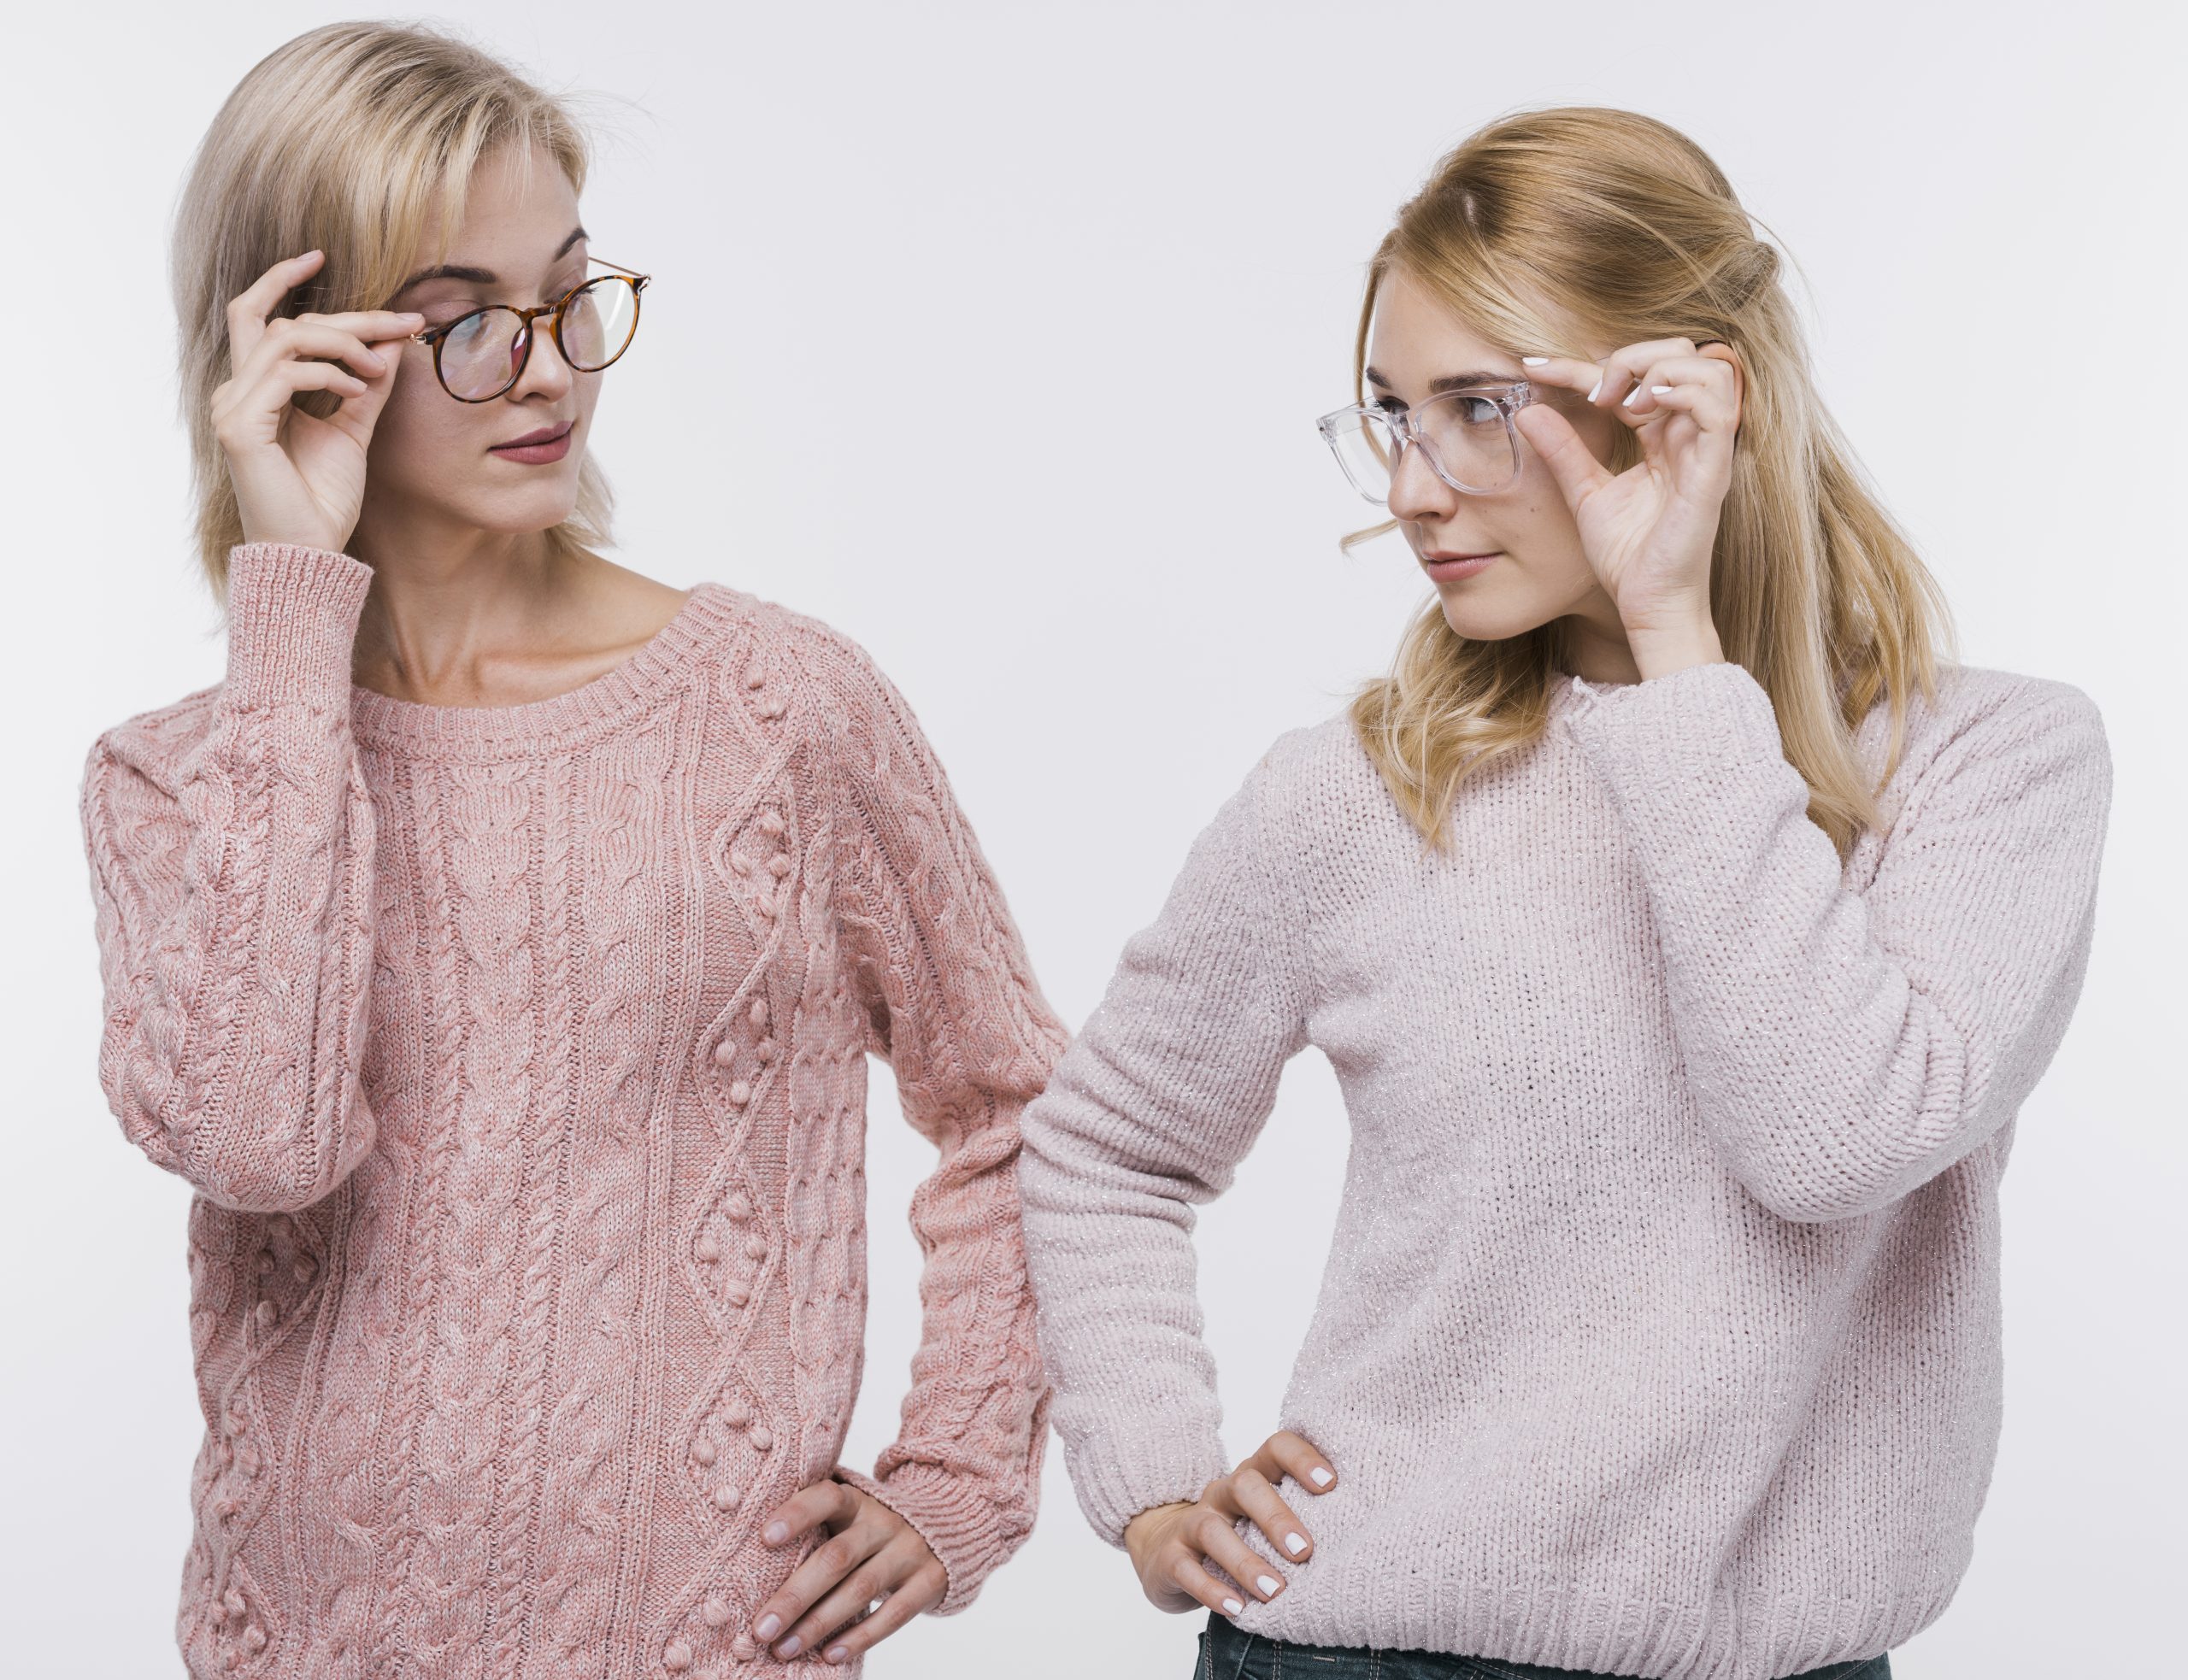 What is the difference between Hypermetropia and Presbyopia